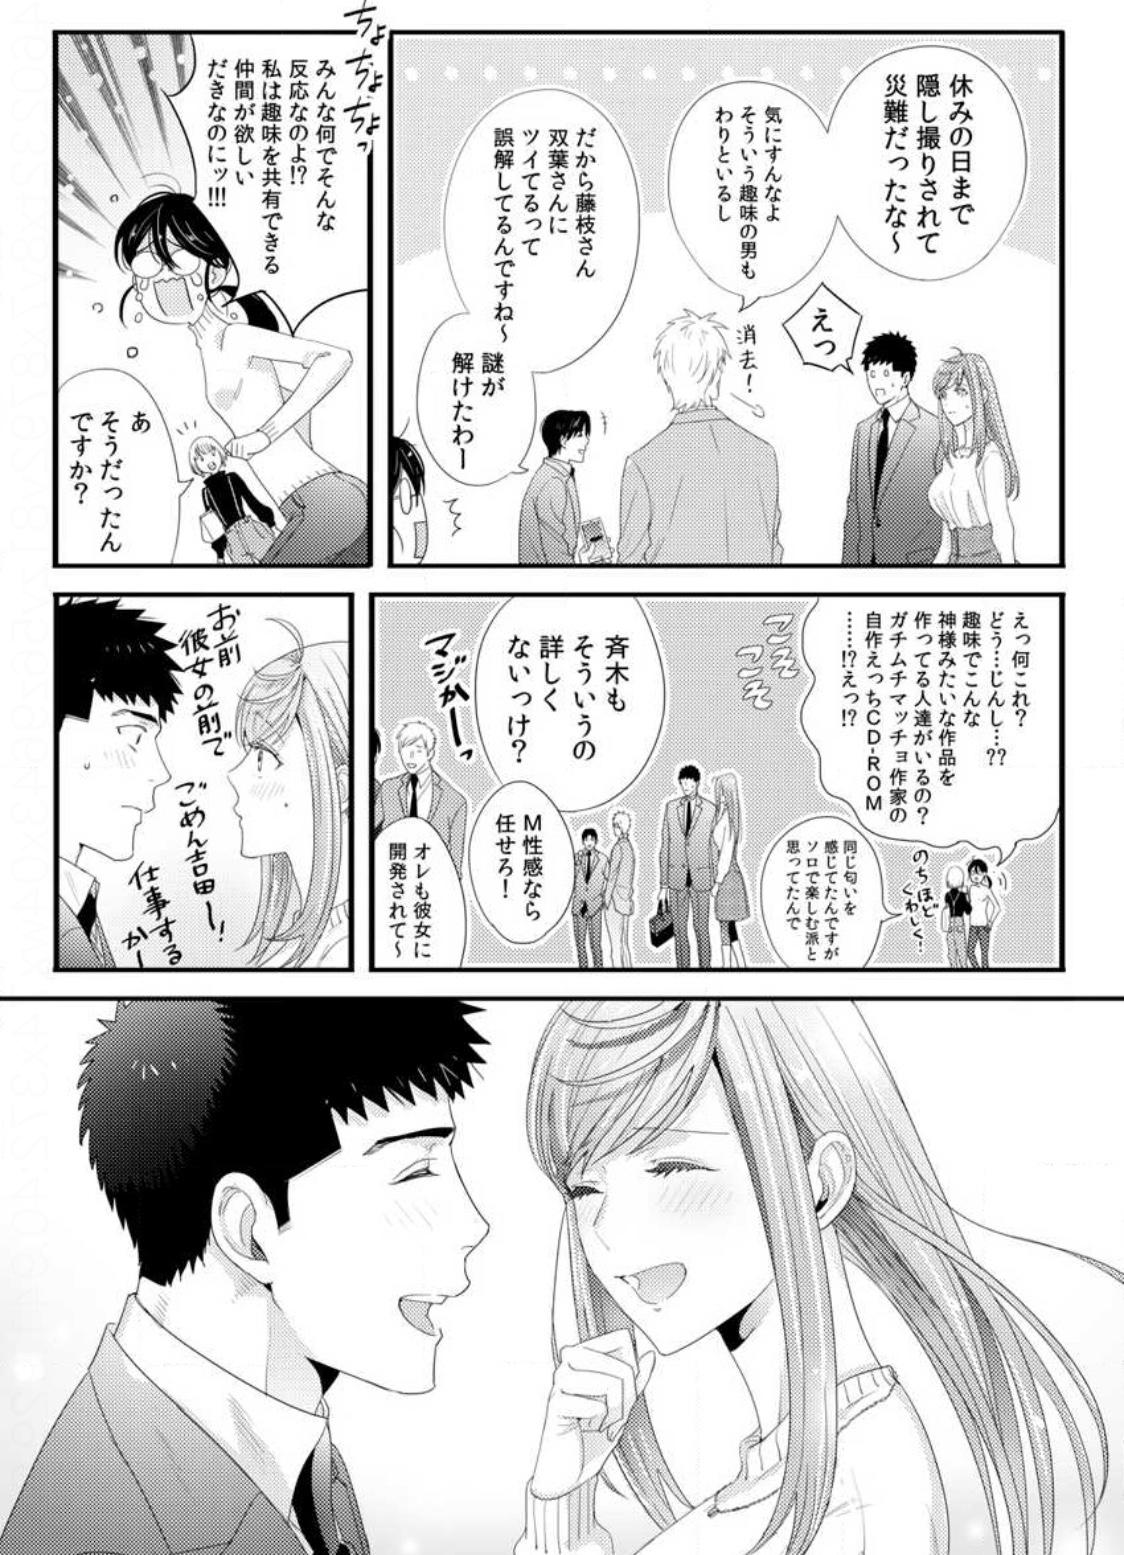 Please Let Me Hold You Futaba-San! Ch. 1-4 101